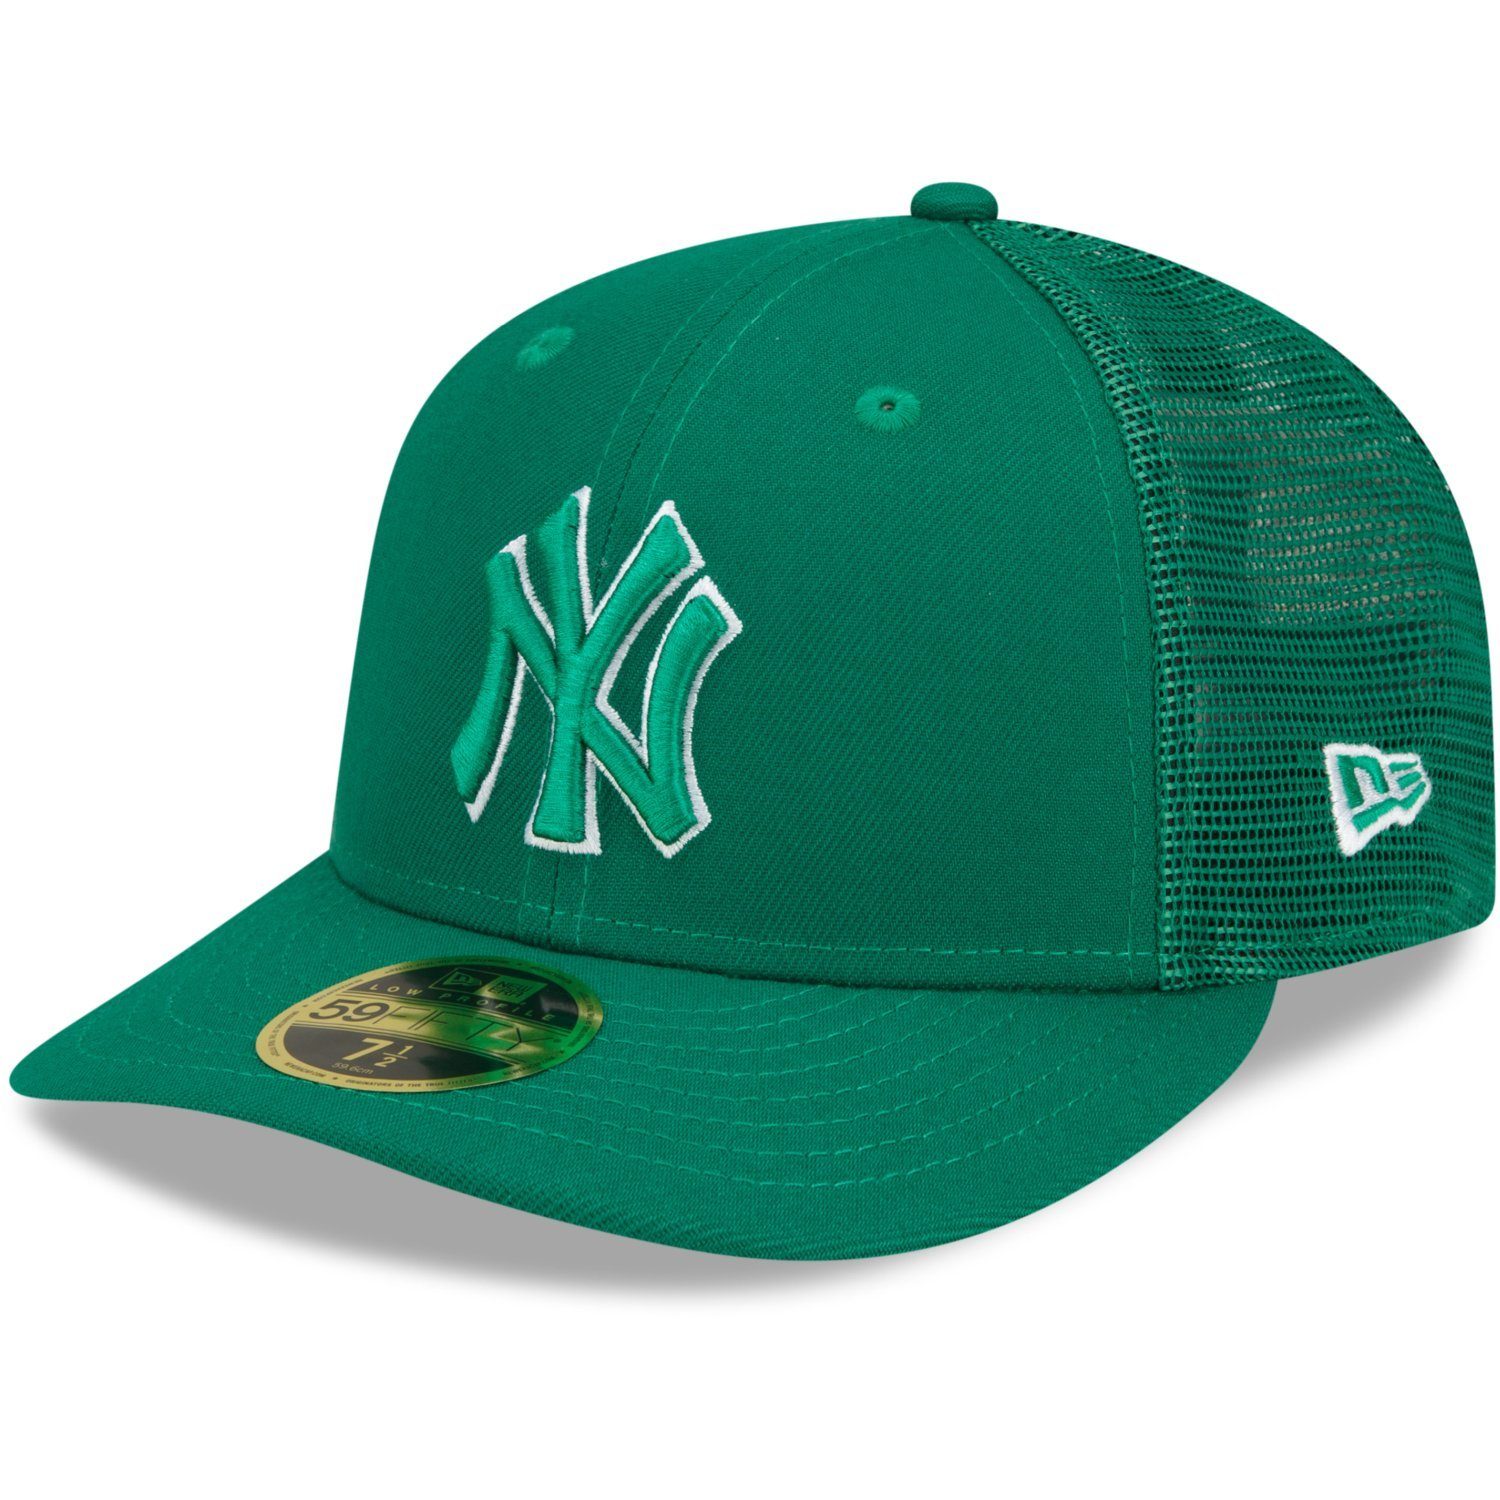 New Era Fitted Cap 59Fifty Low Profile ST. PATRICK’S DAY New York